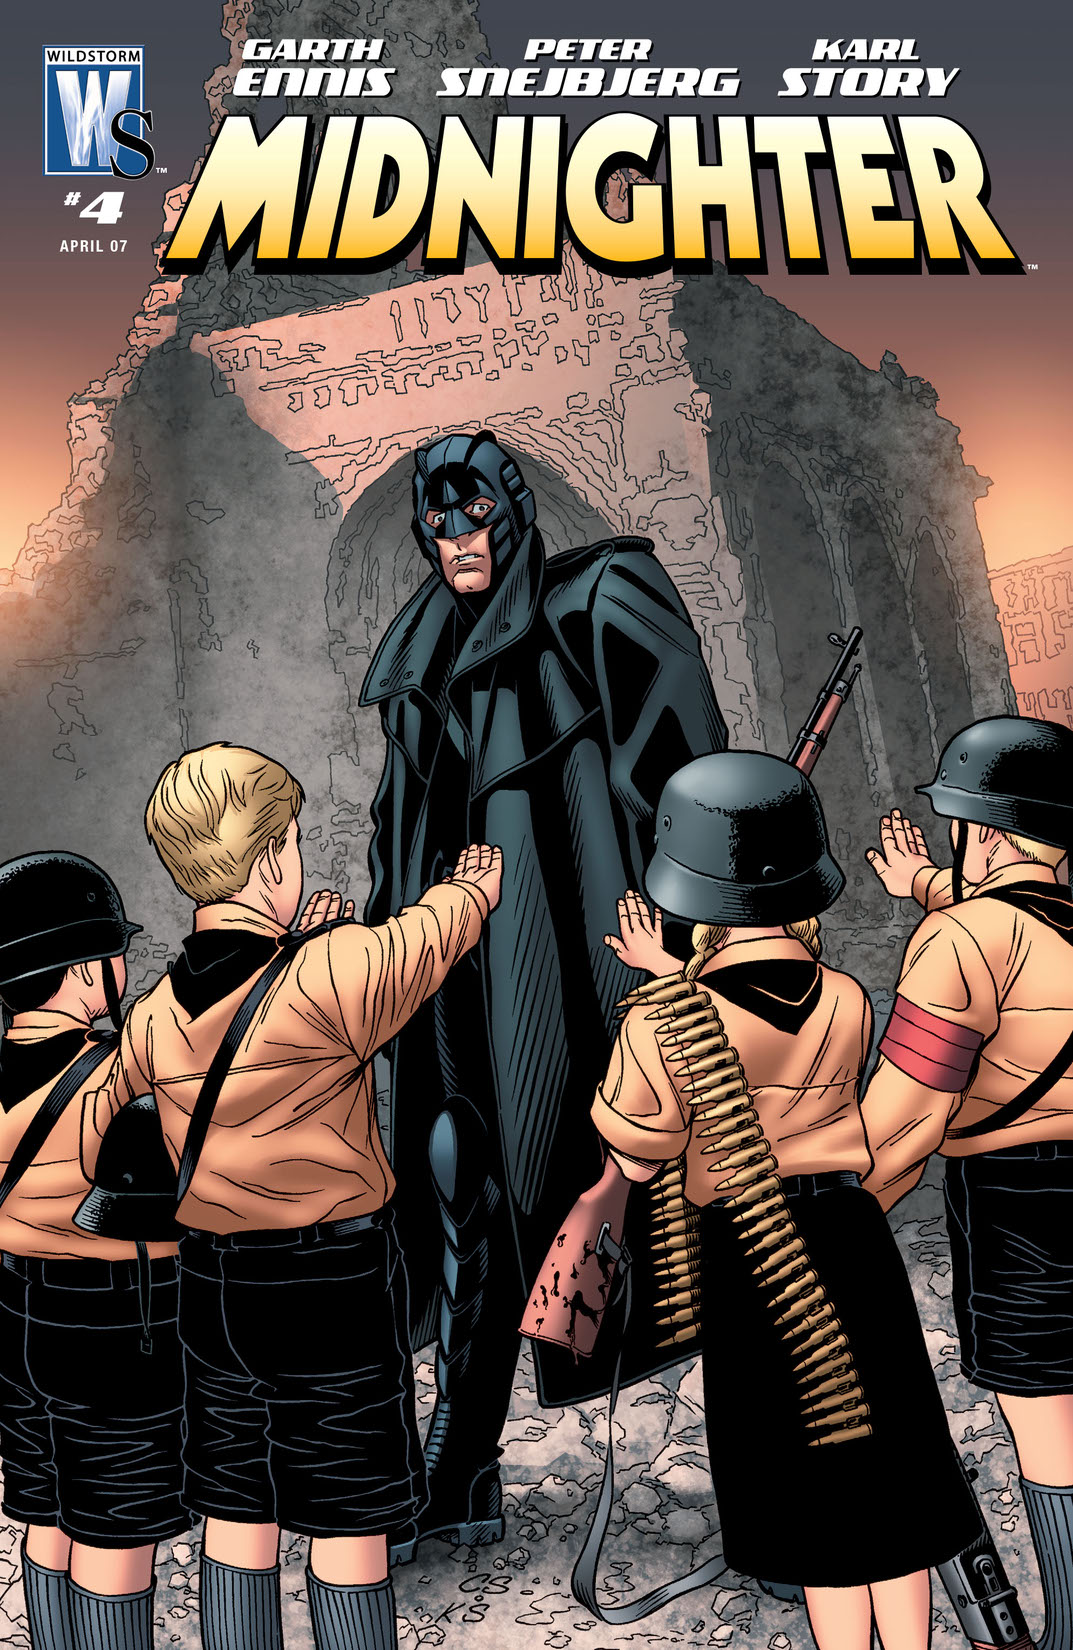 Midnighter (2006-) #4 preview images